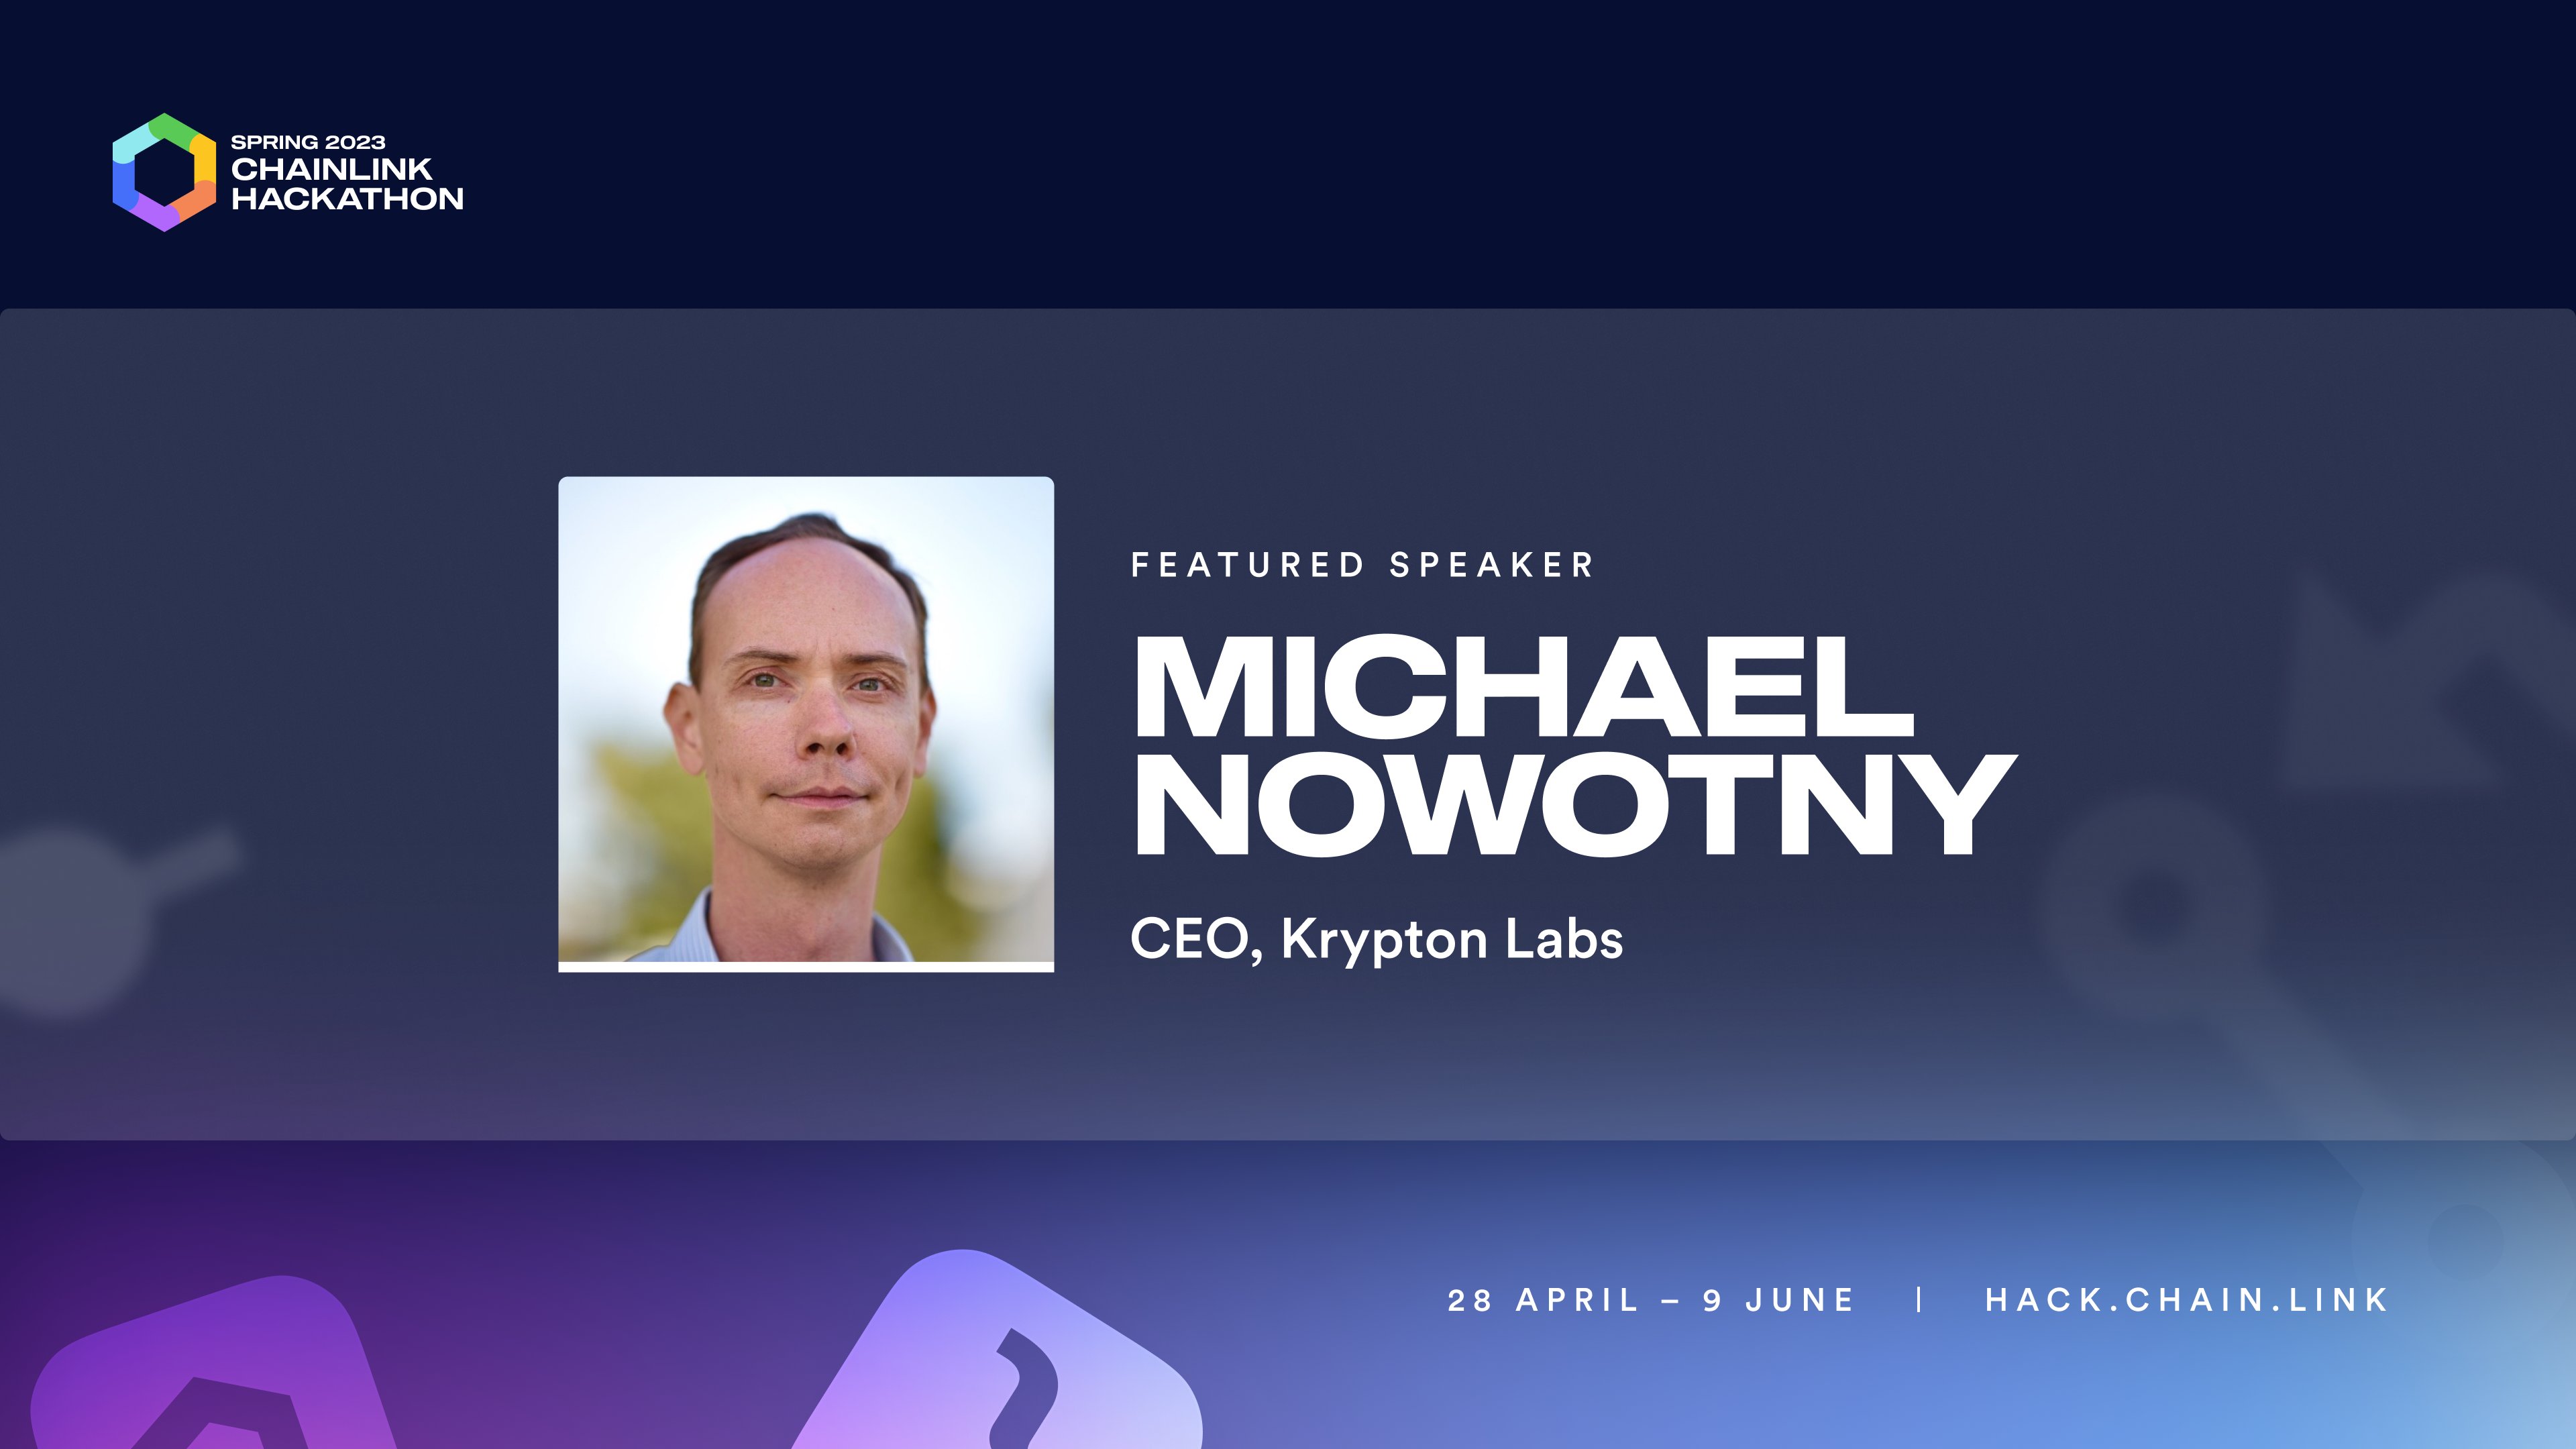 On May 30 at 3PM ET, tune into an episode of Hacker Stories where @KryptonProtocol CEO @MichaelCNowotny shares how submi...